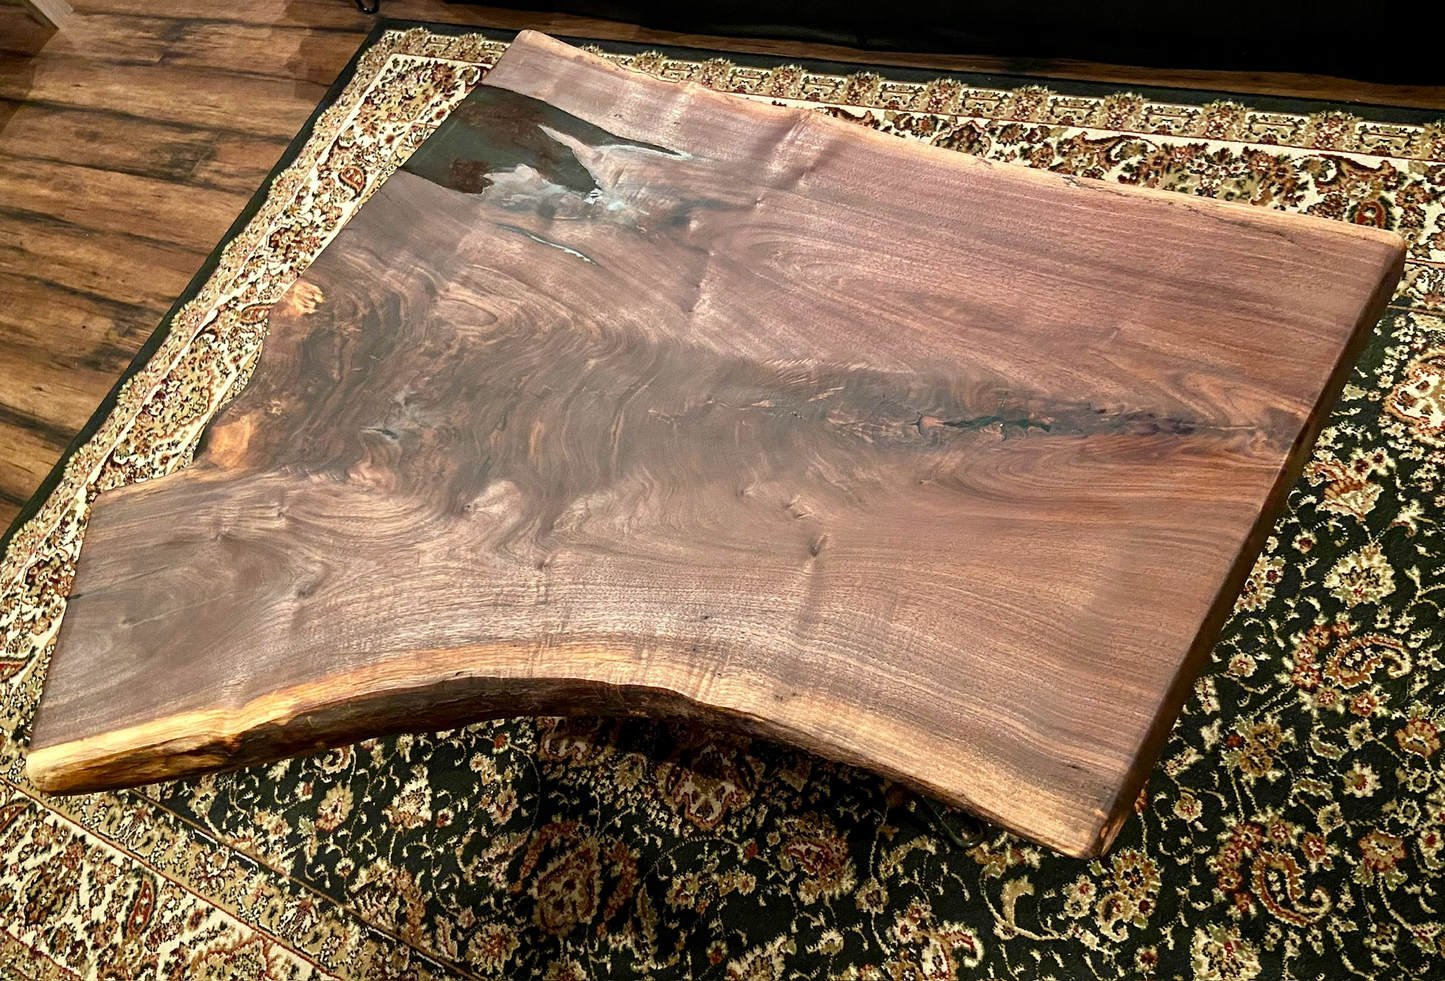 Naturally Curved Live Edge Walnut Coffee Table|Live Edge Wood Coffee Table|Natural Edge Black Walnut Table|Live Edge Rustic Walnut Table